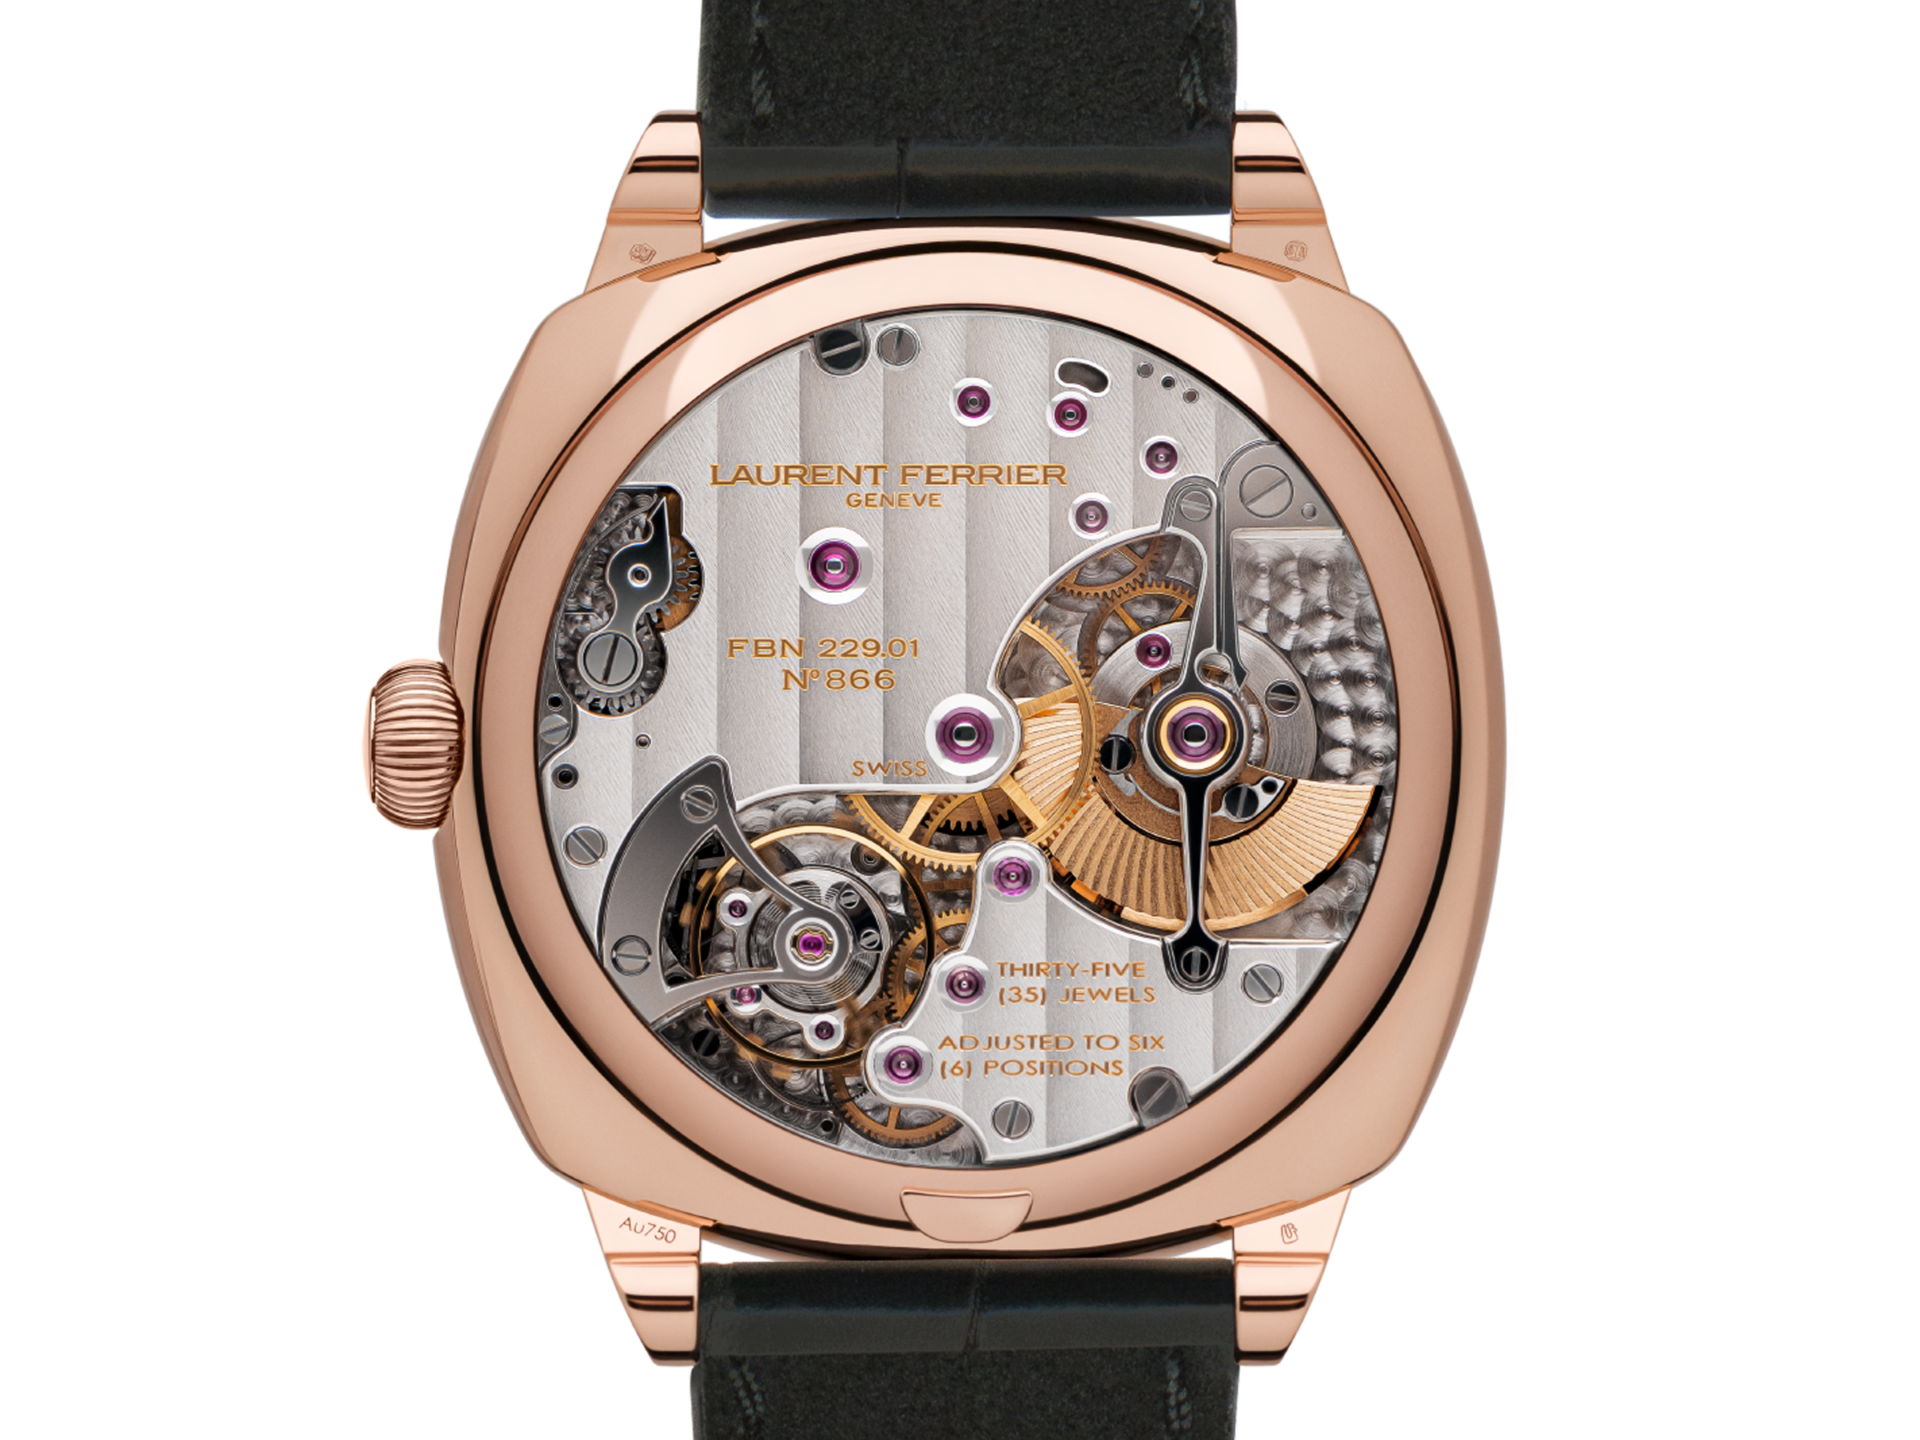 Laurent ferrier square micro rotor retro black red gold case watch lcf013. R5. N2w caseback hd